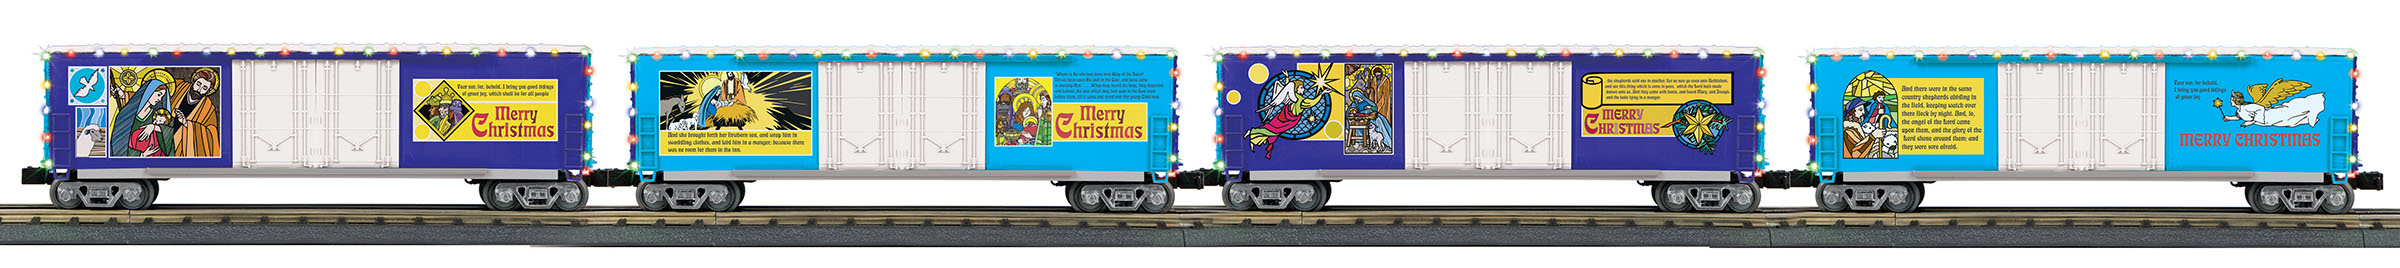 Christmas 4-Car 50' Double Door Plugged Boxcar Set With LED Lights image